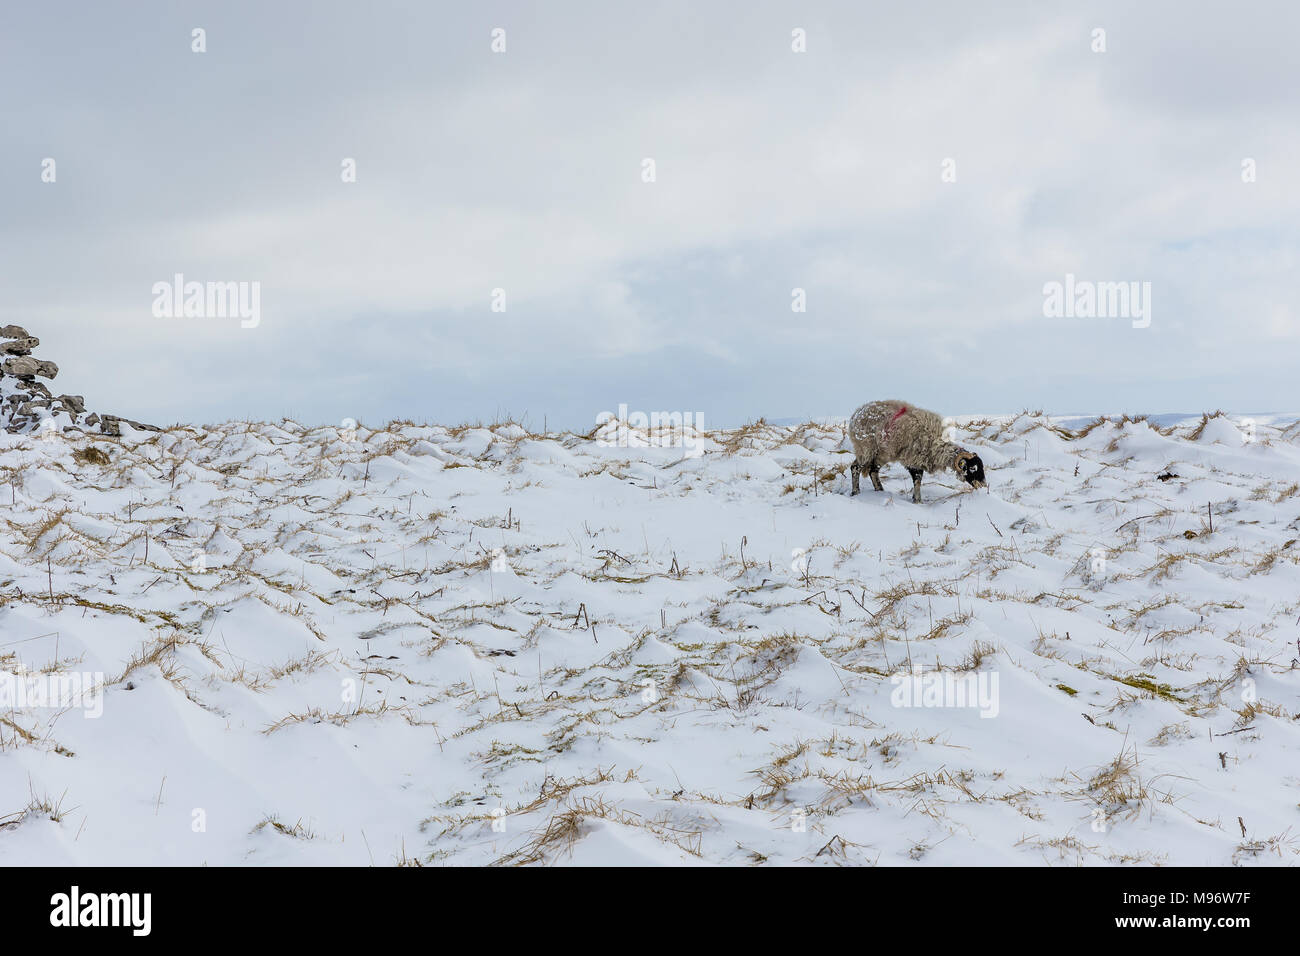 Solitary Swaledale Sheep in the Yorkshire Dales, England, UK during winter.  Snowy, minimalistic winter scene.  Landscape. Copy space Stock Photo